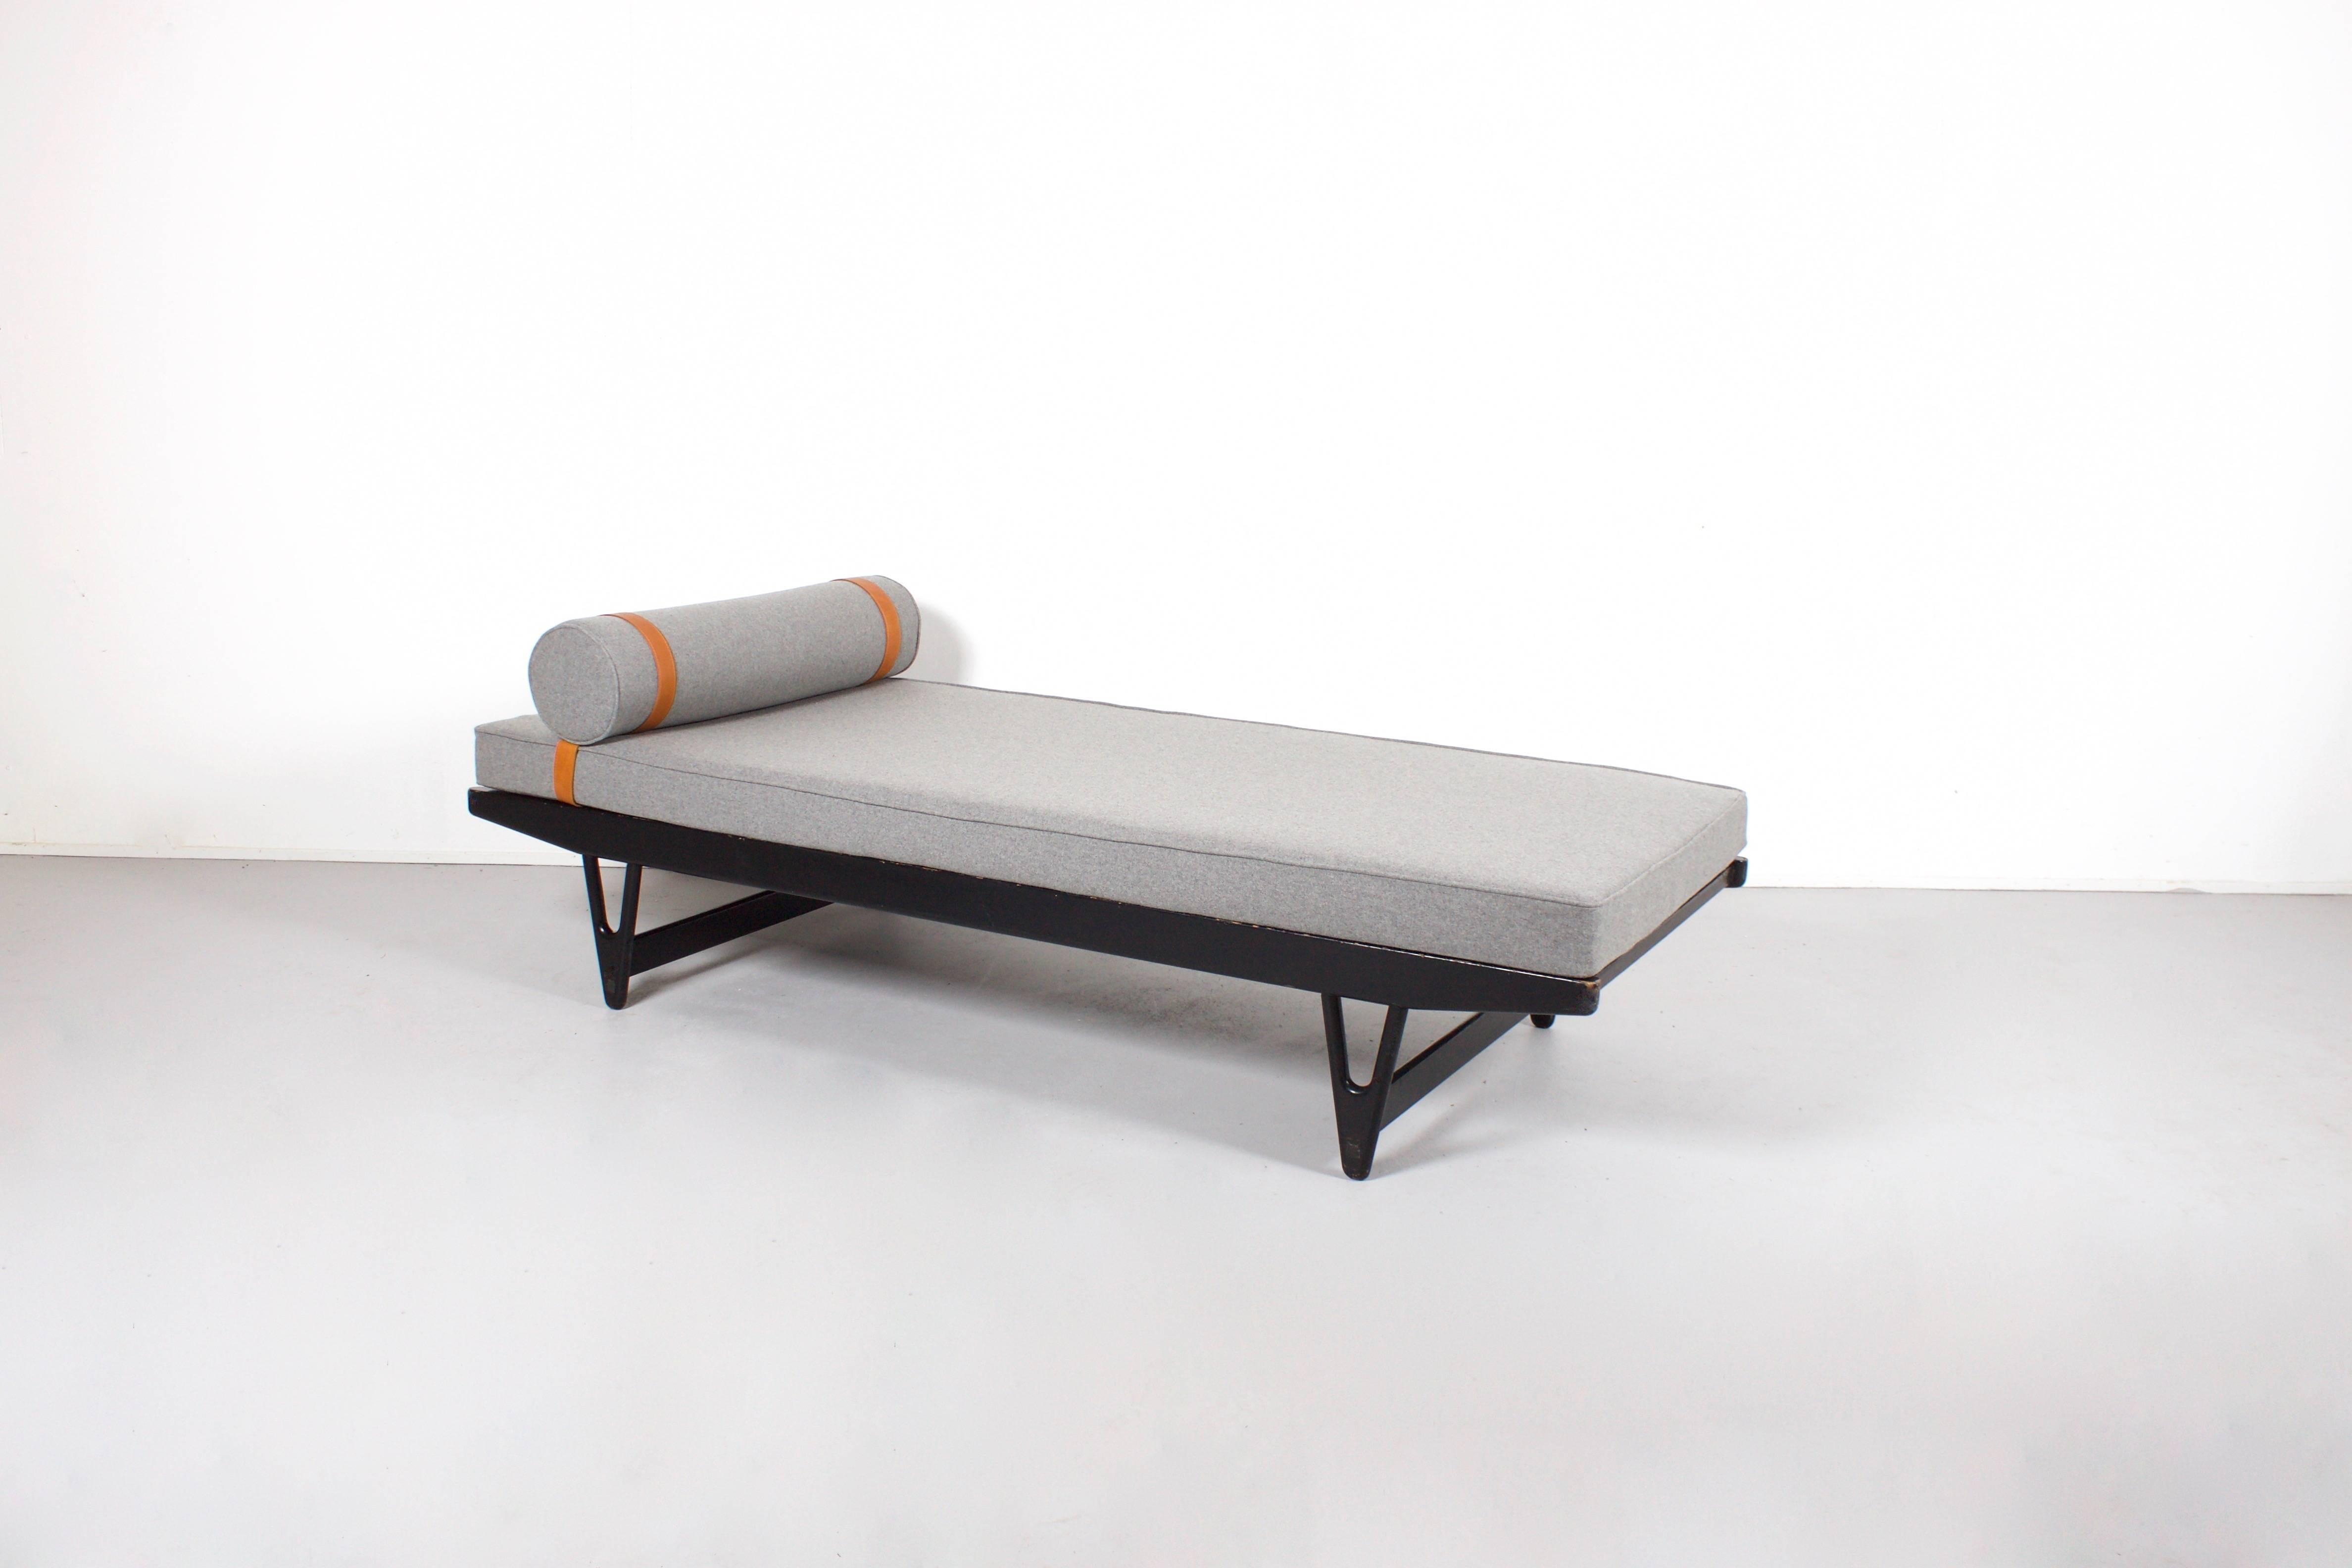 Rare Scandinavian Gemla Diö daybed in very good condition.

Designed in the 1960s

The base of this daybed is made from ebonized beech wood and has a great form due to the beautifully crafted triangular feet.

The mattress has new foam and is